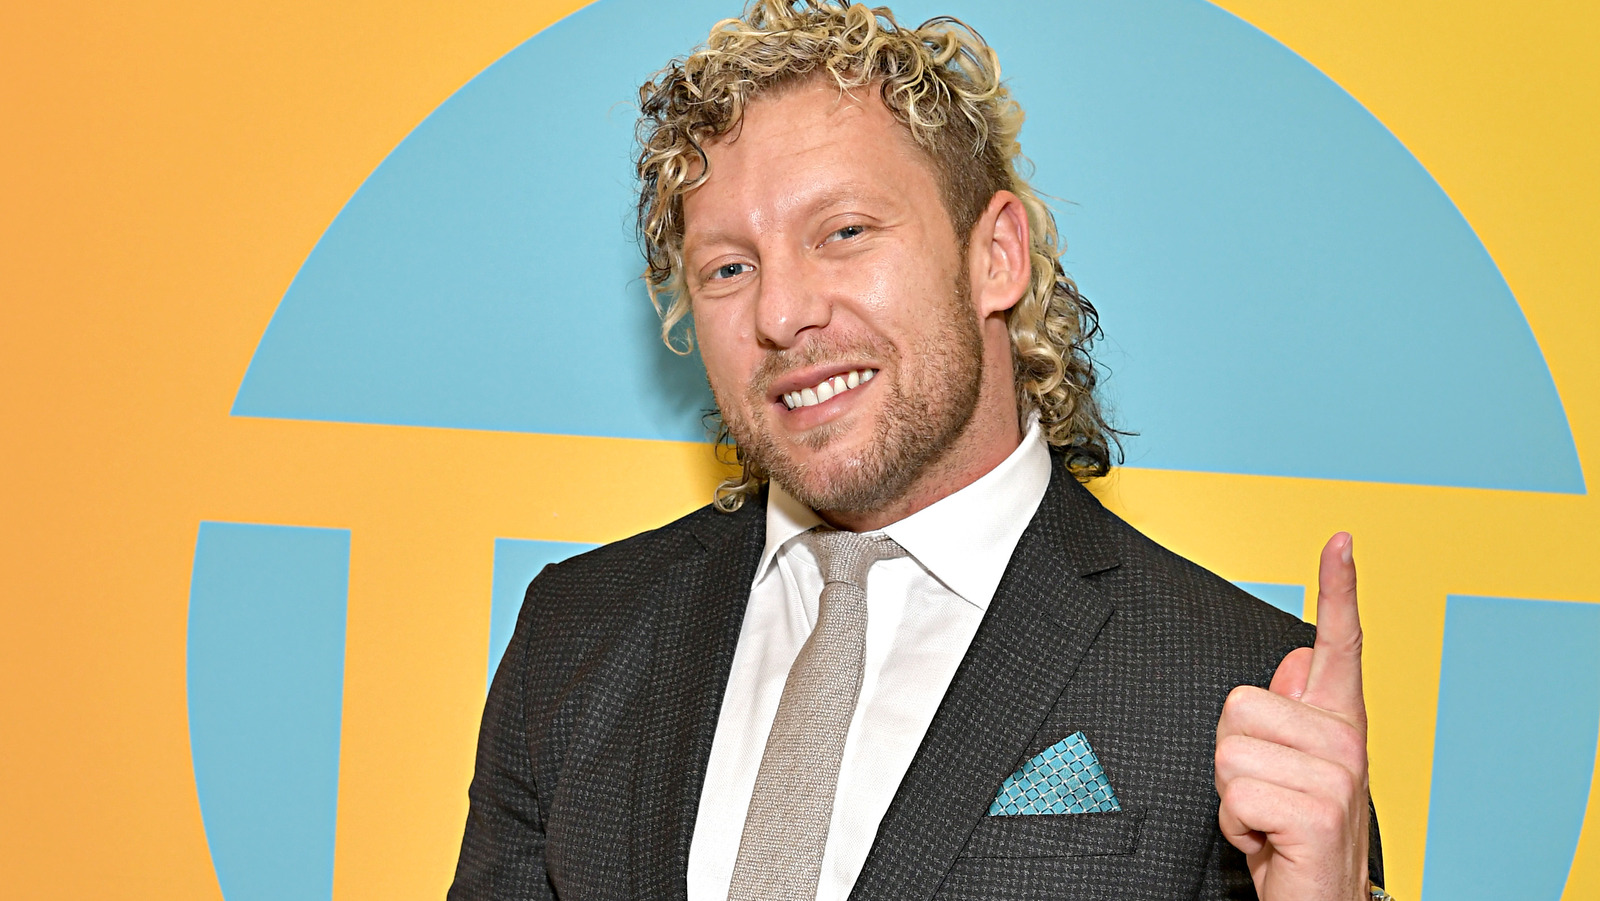 AEW Dynamite Results 5/1 - We Hear From Kenny Omega, TNT Championship
On The Line & More